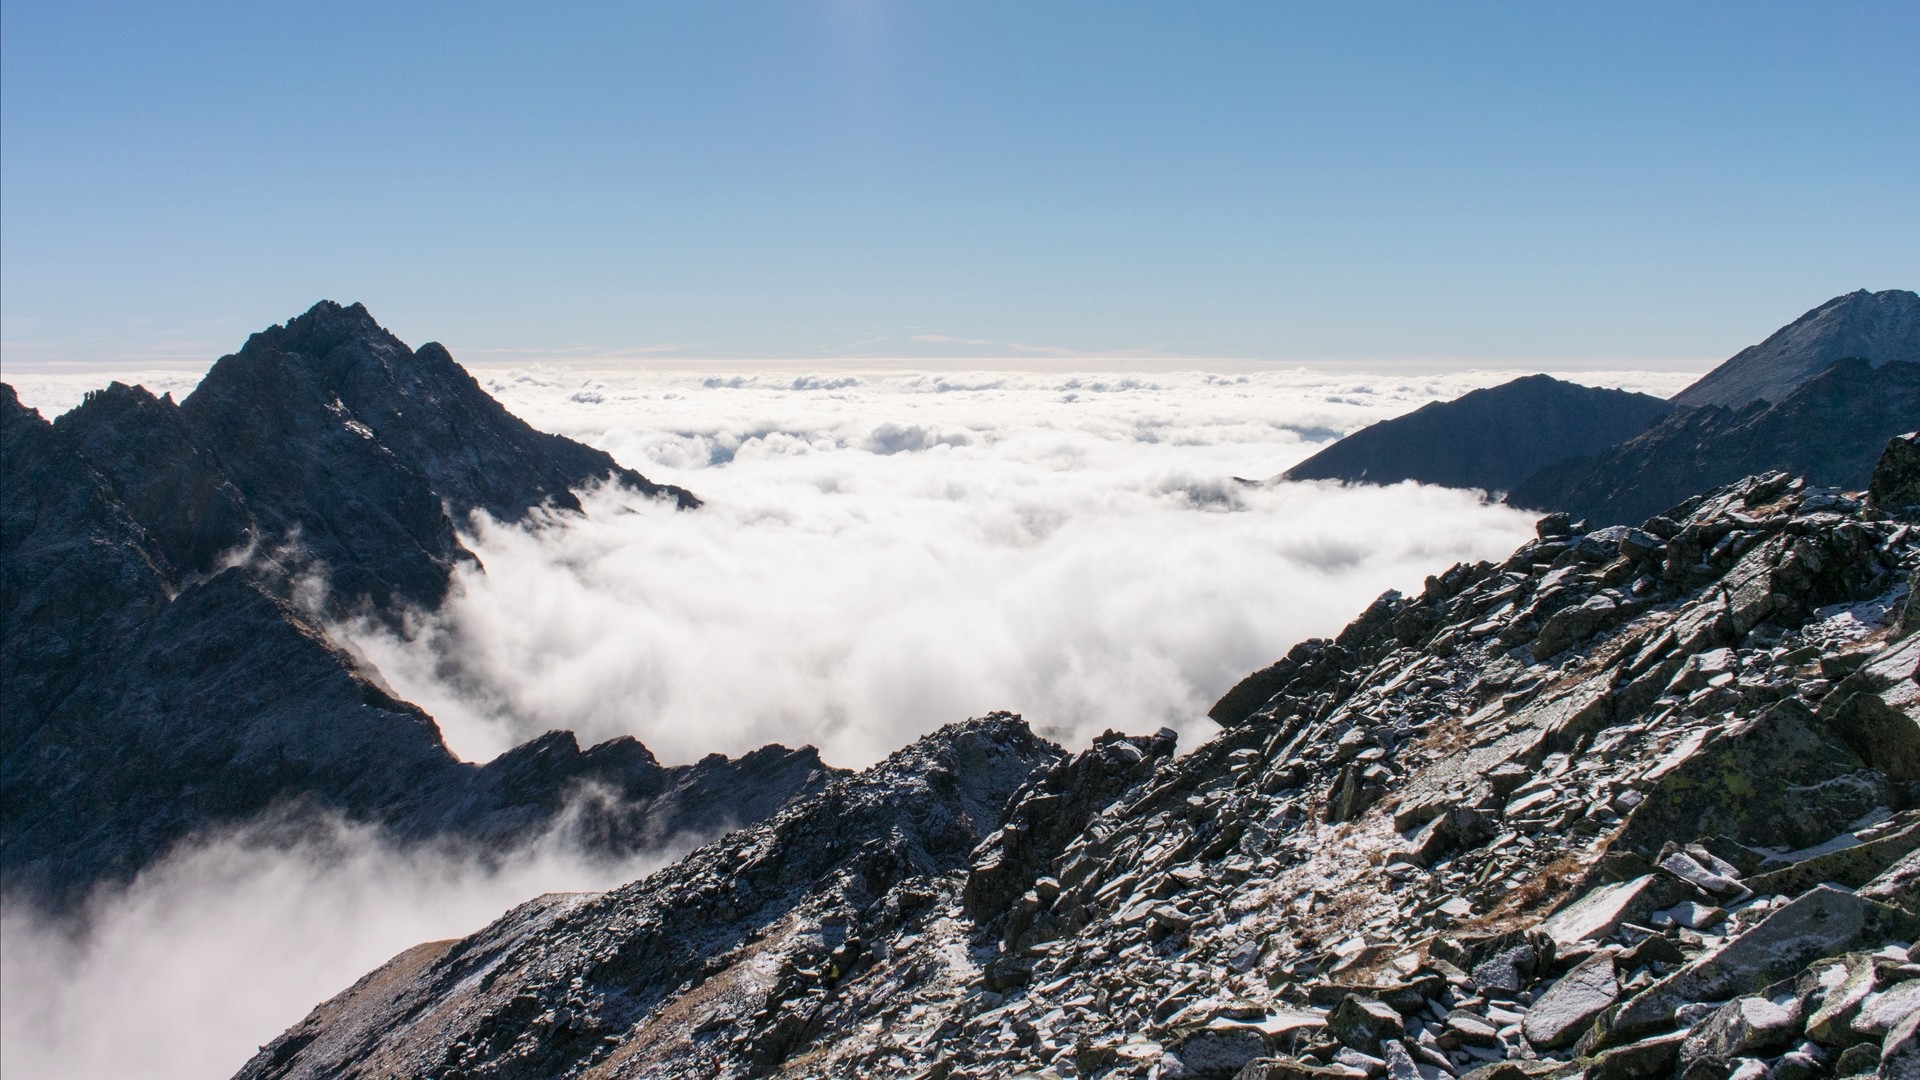 1920x1080 wallpapers: Tatras, Slovakia, mountains, clouds, amazing wallpaper (image)